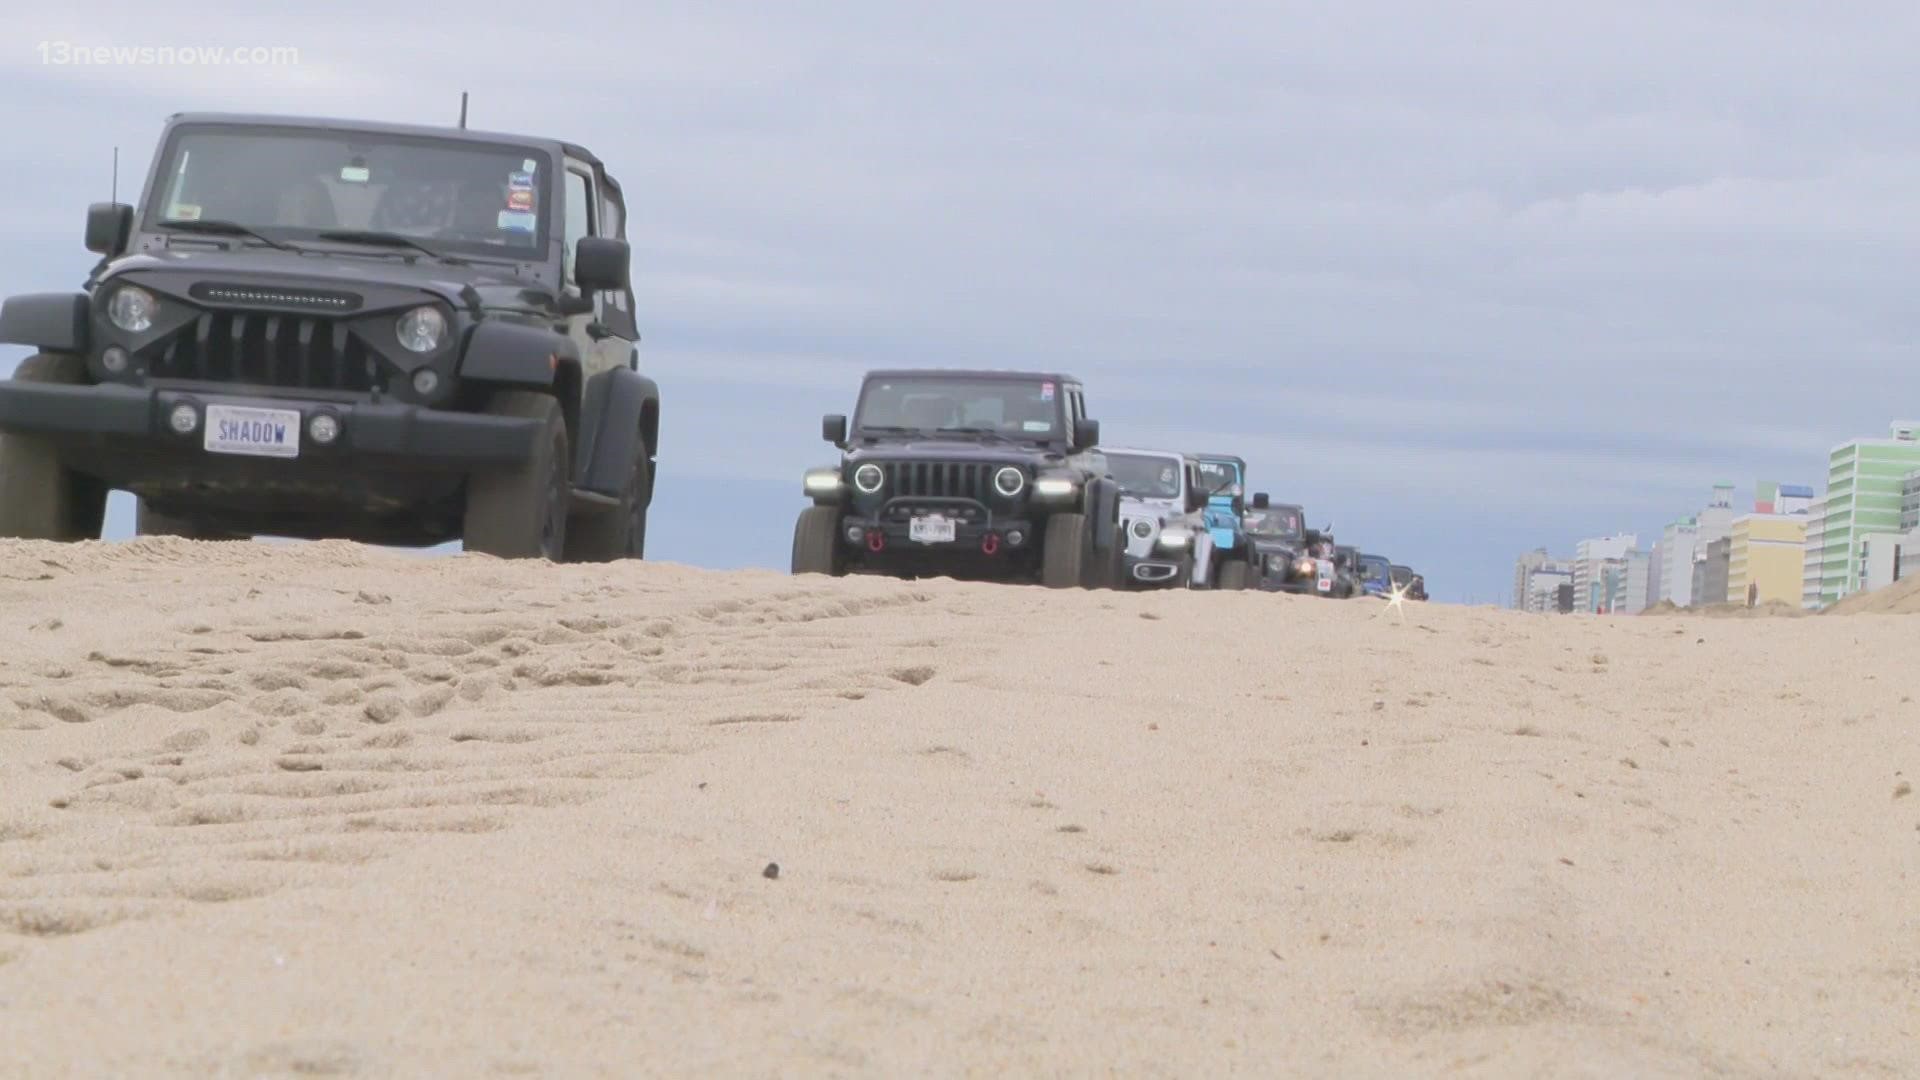 The weekend included sunrise beach cruises and beach sand courses for drivers to test their skills.